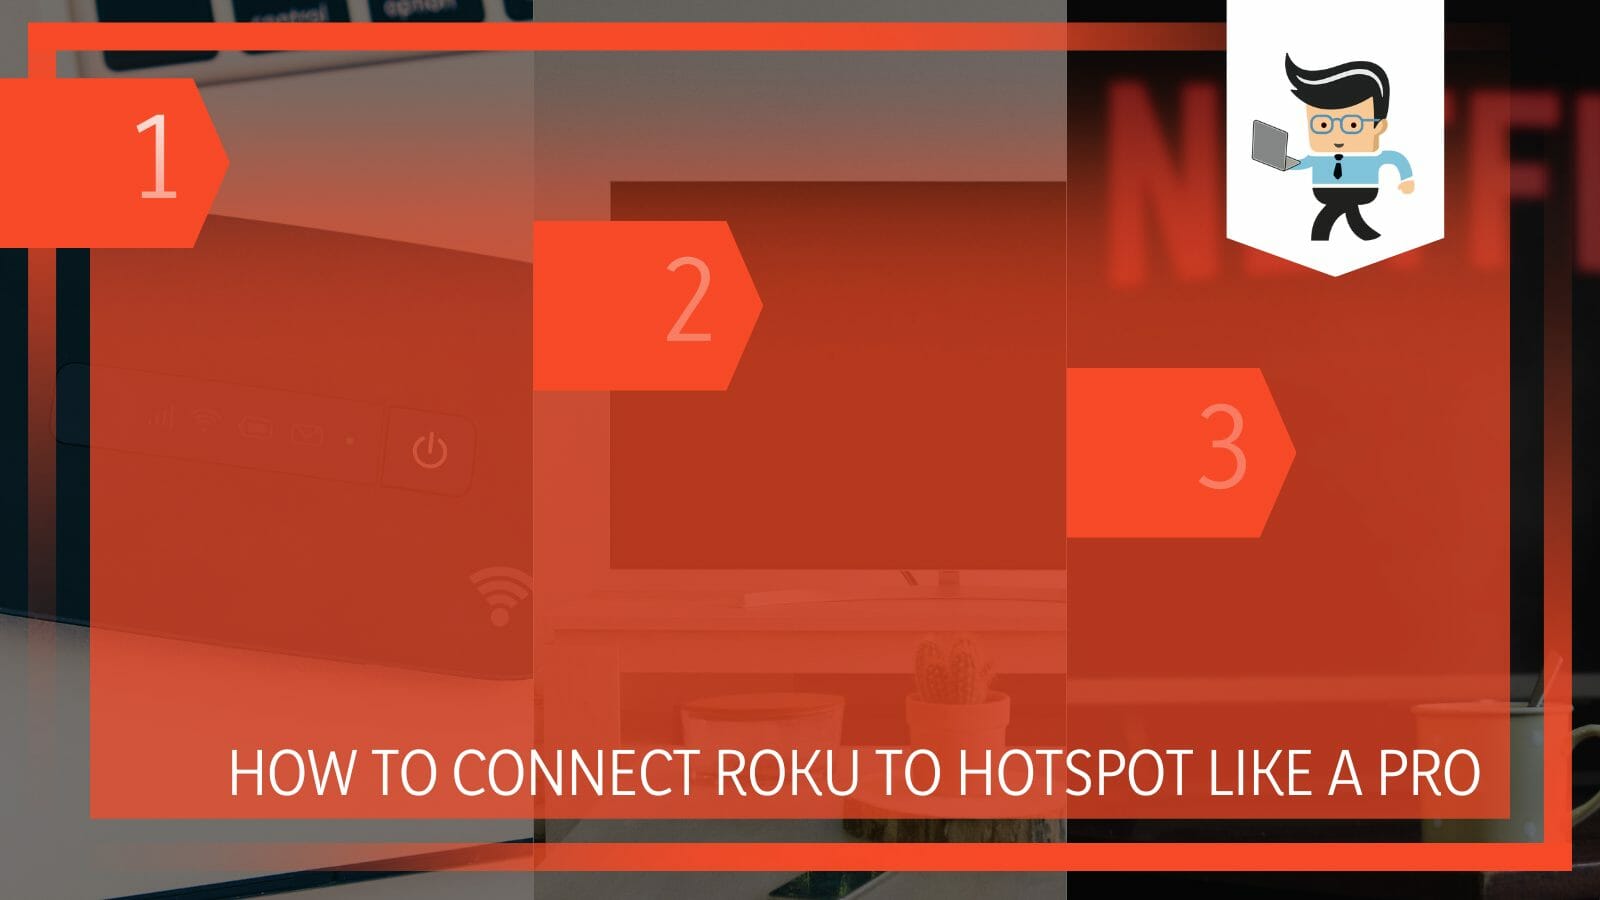 How to Connect Roku to Hotspot Like a Pro